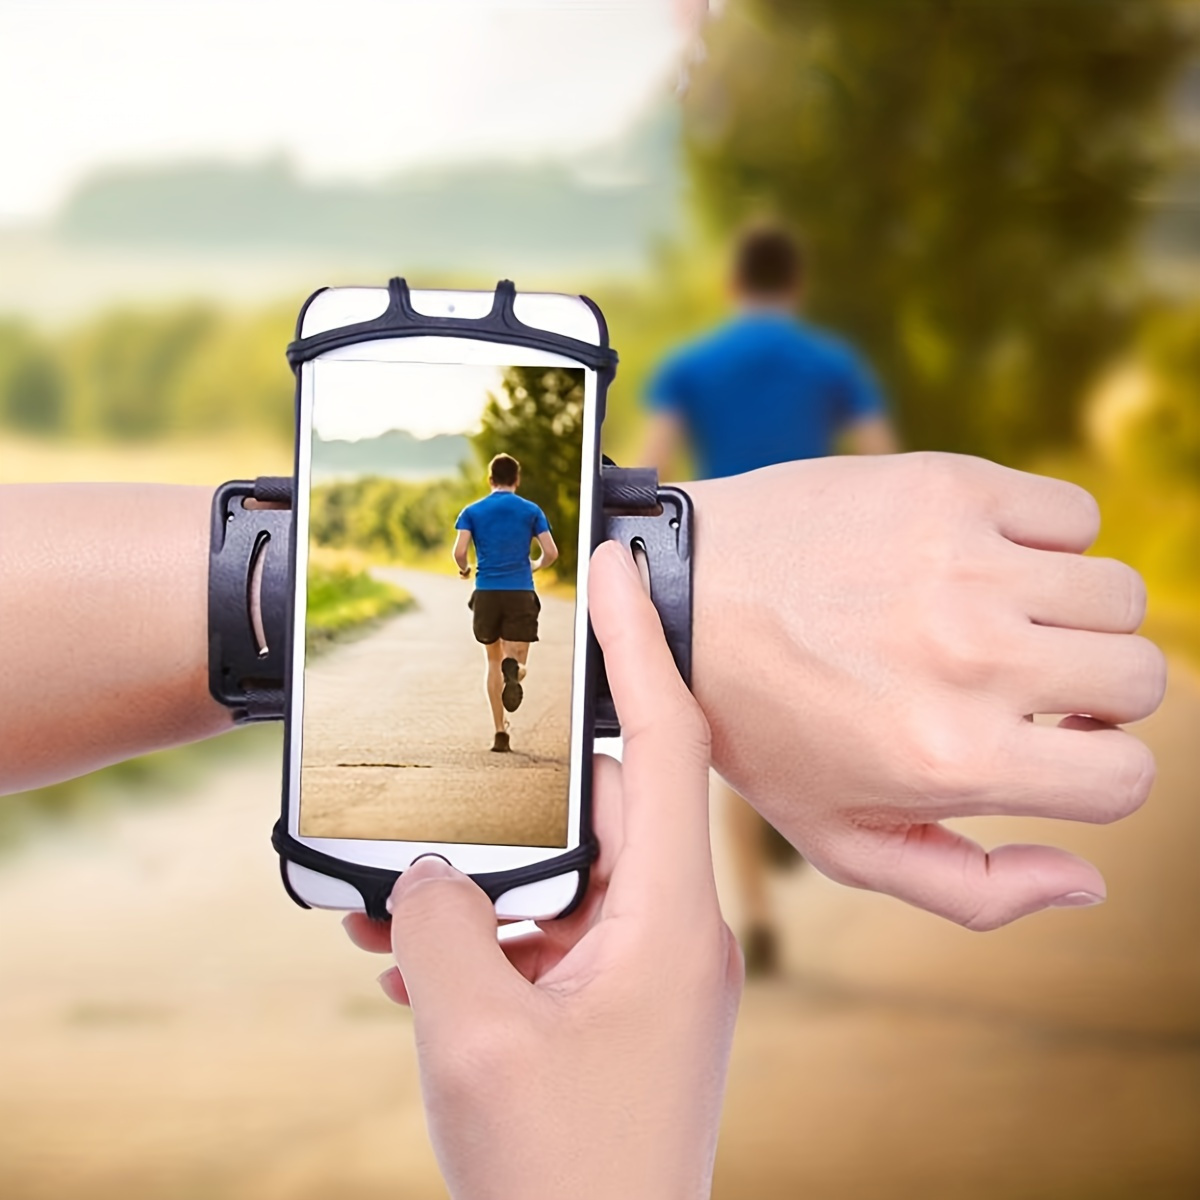 

360 Degree Rotating Mobile Phone Arm Band, Outdoor Sports Mobile Phone Arm Bag, Elastic Arm Sleeve